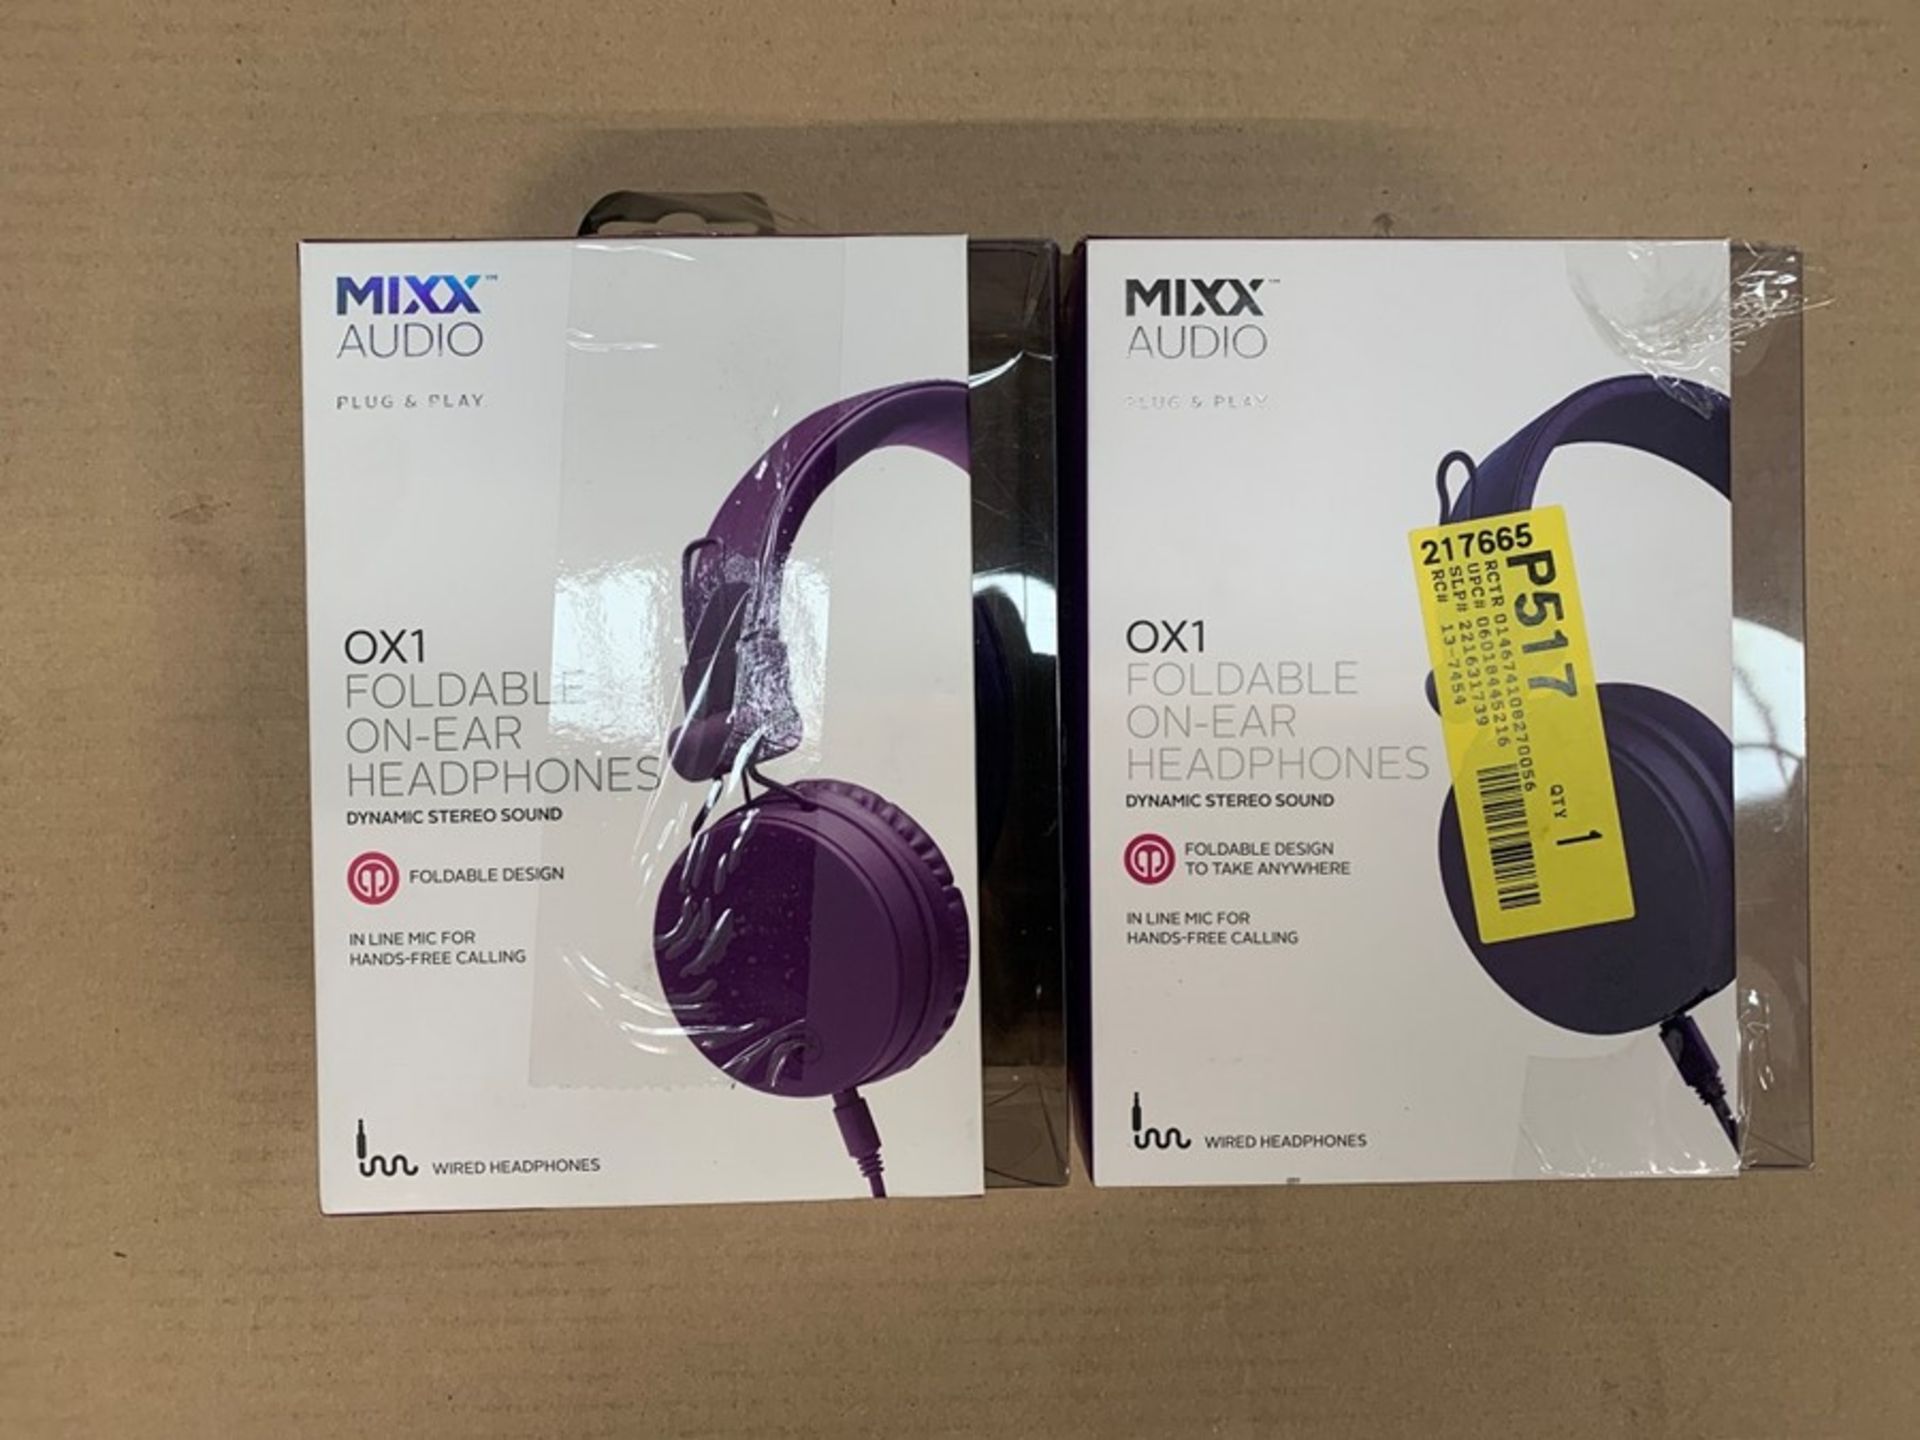 1 LOT TO CONTAIN 2 MIXX AUDIO OX1 FOLDABLE ON-EAR HEADPHONES IN PURPLE / BL - 7665 / RRP £23.98 (